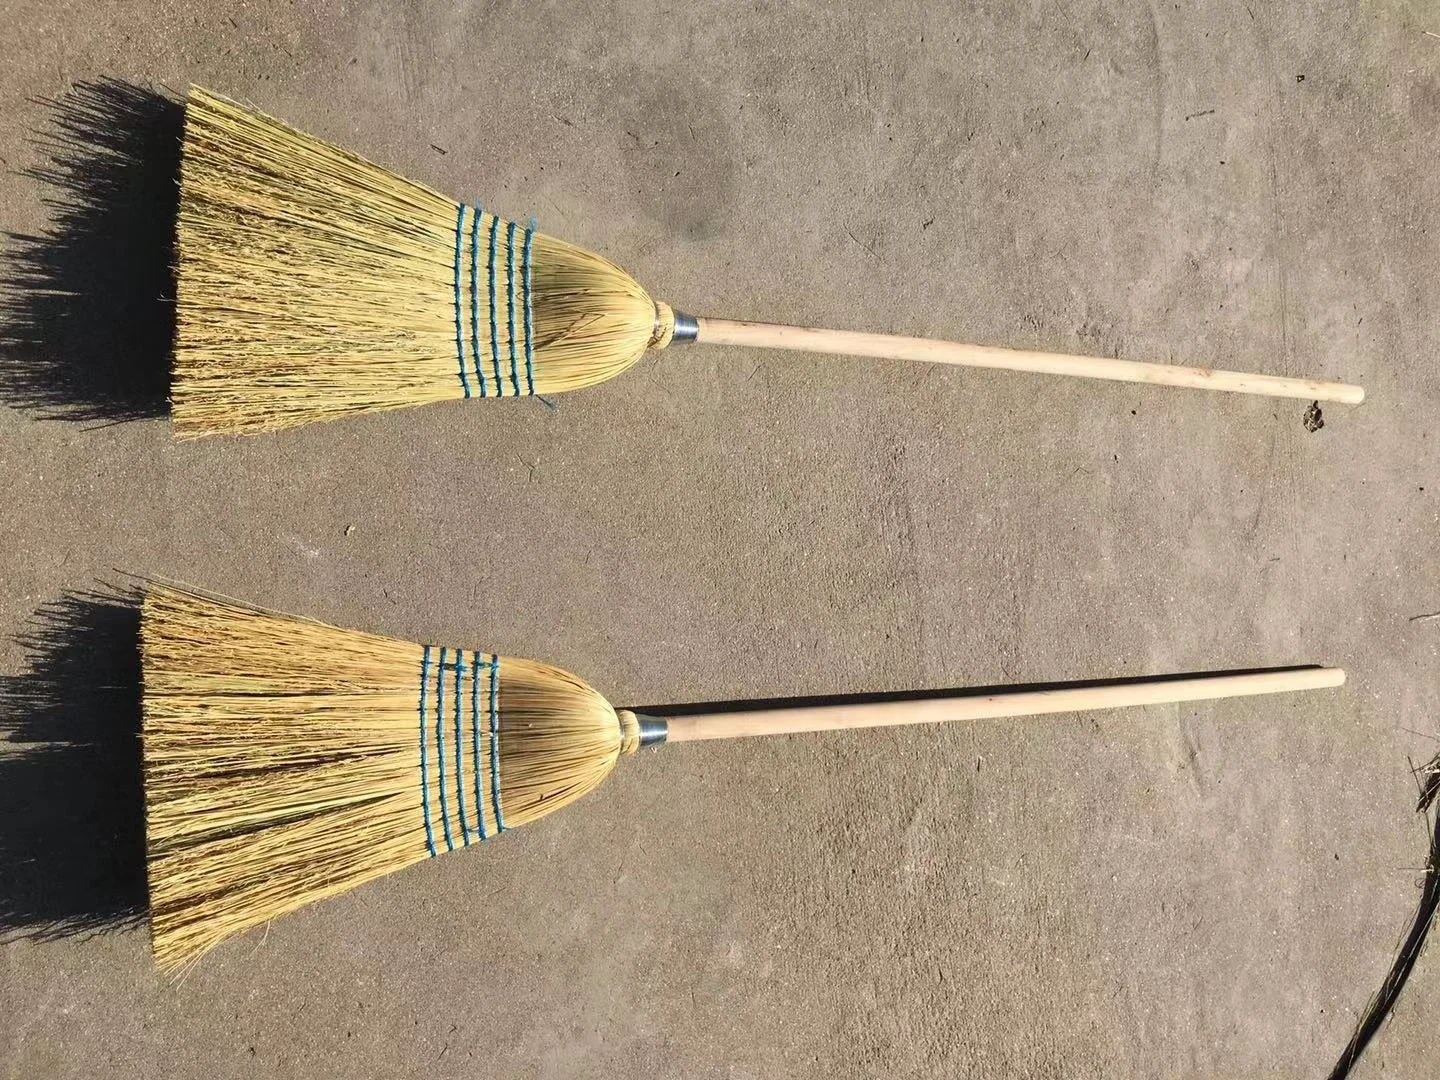 Heavy-Duty Broom Corn Broom Outdoor Commercial Indoor Perfect for Courtyard Garage Lobby Mall Market Floor Home Office Leaves